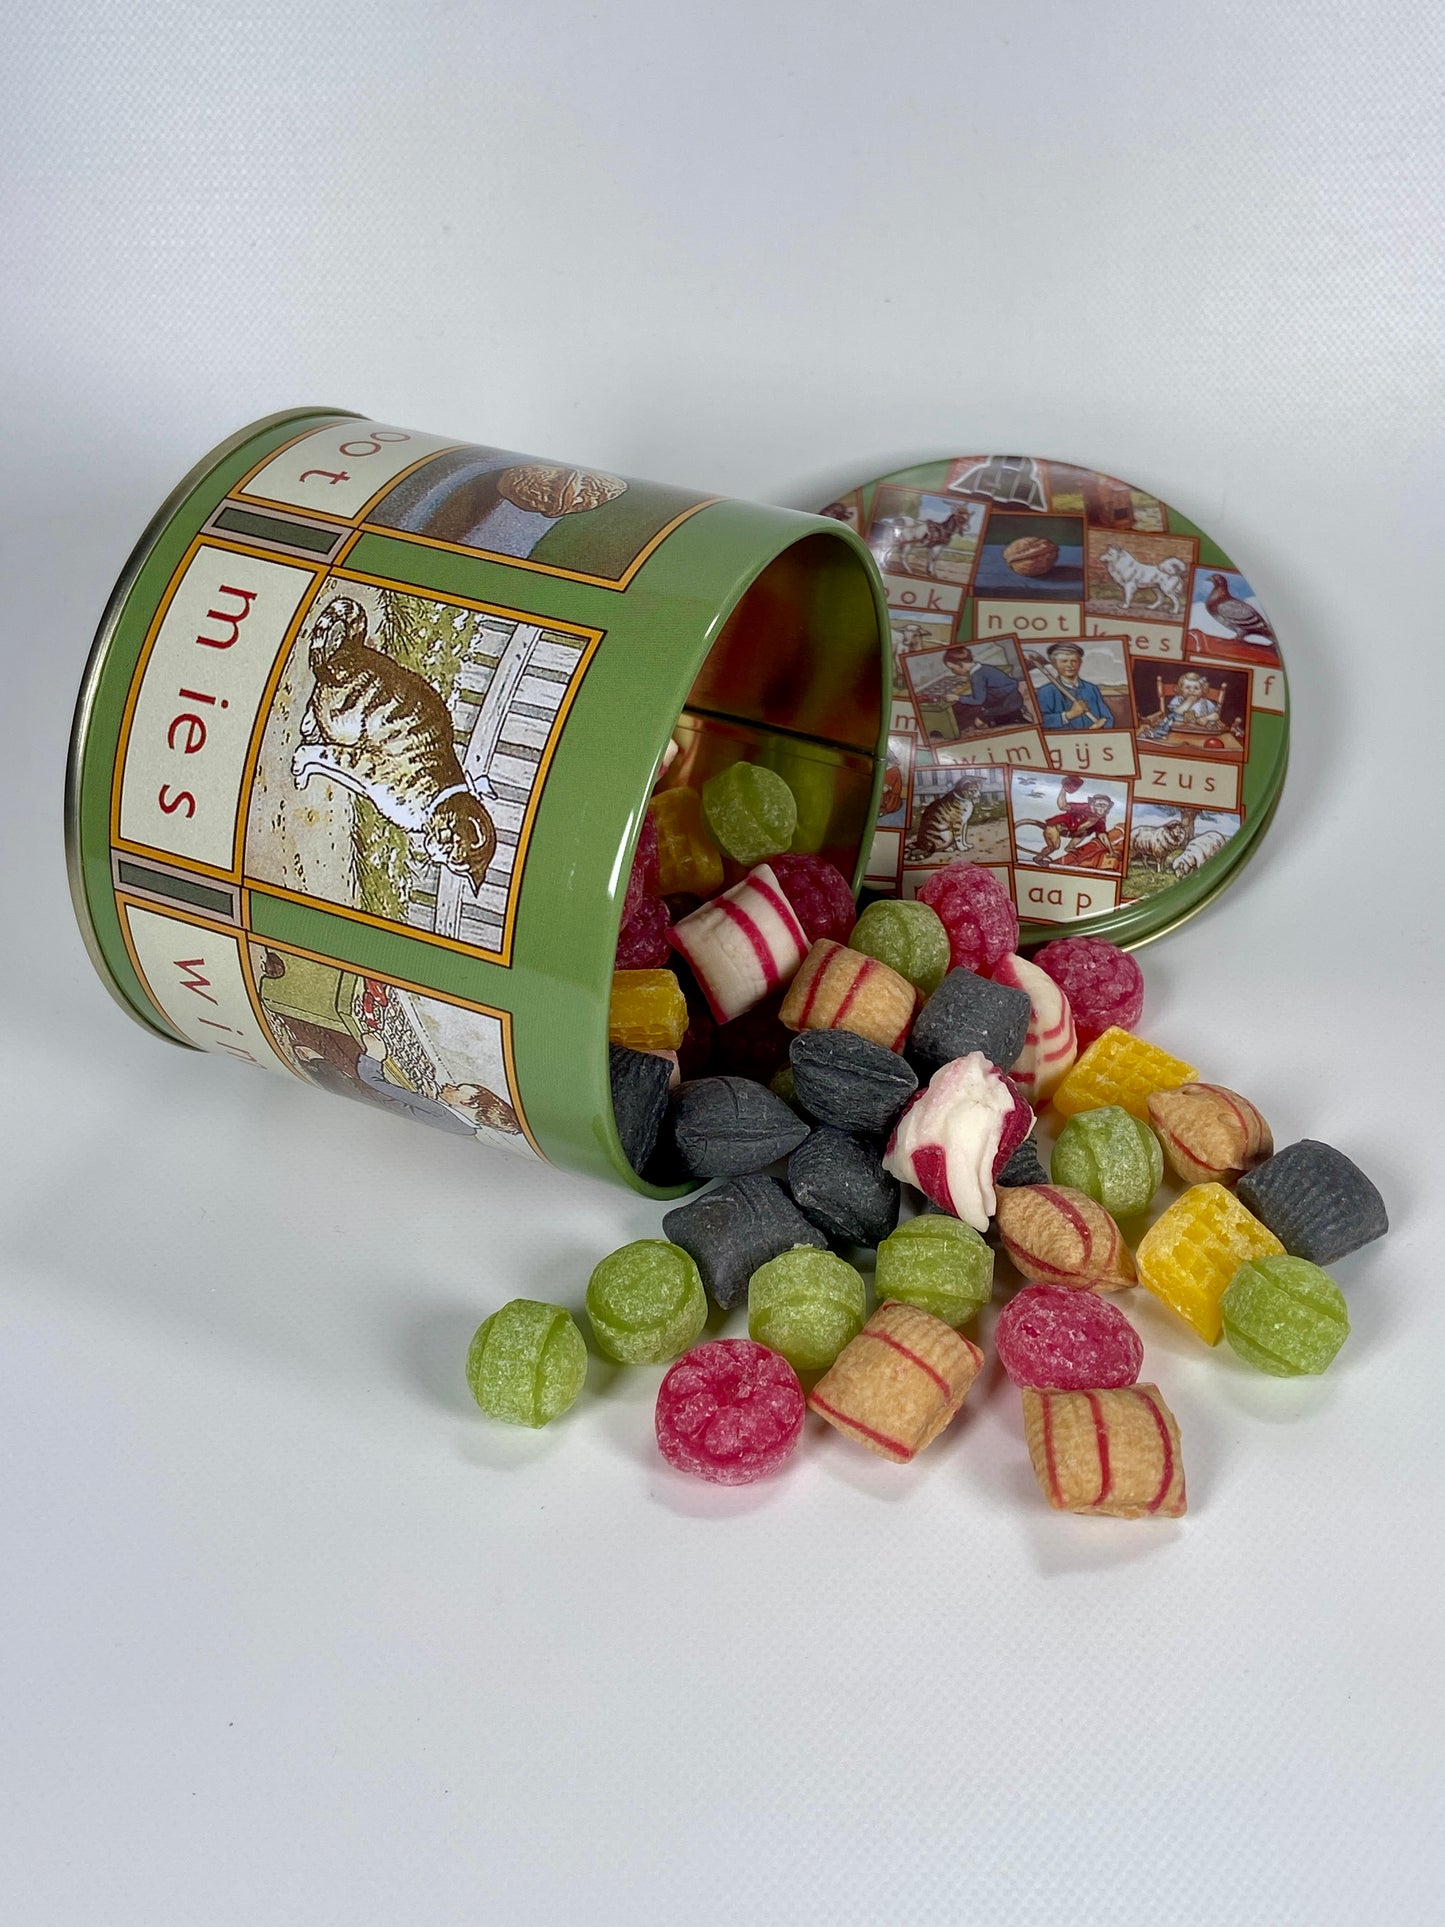 Classic Dutch sweets in round aap noot mies tin - Big BIte Dutch Treats